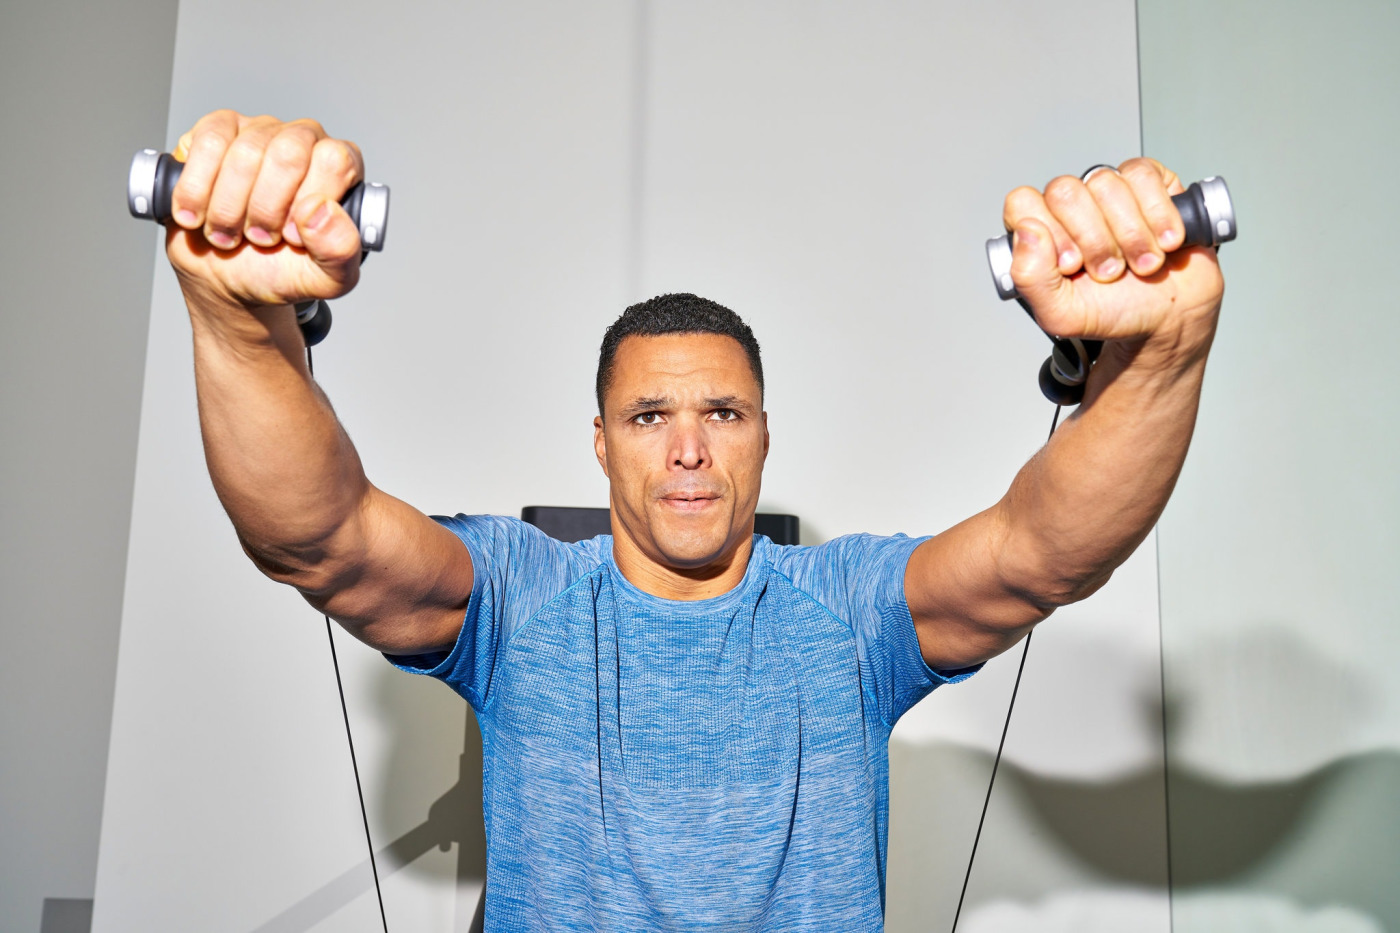 The New York Times: N.F.L. Hall of Famer Tony Gonzalez Is Serious About His Beauty Sleep